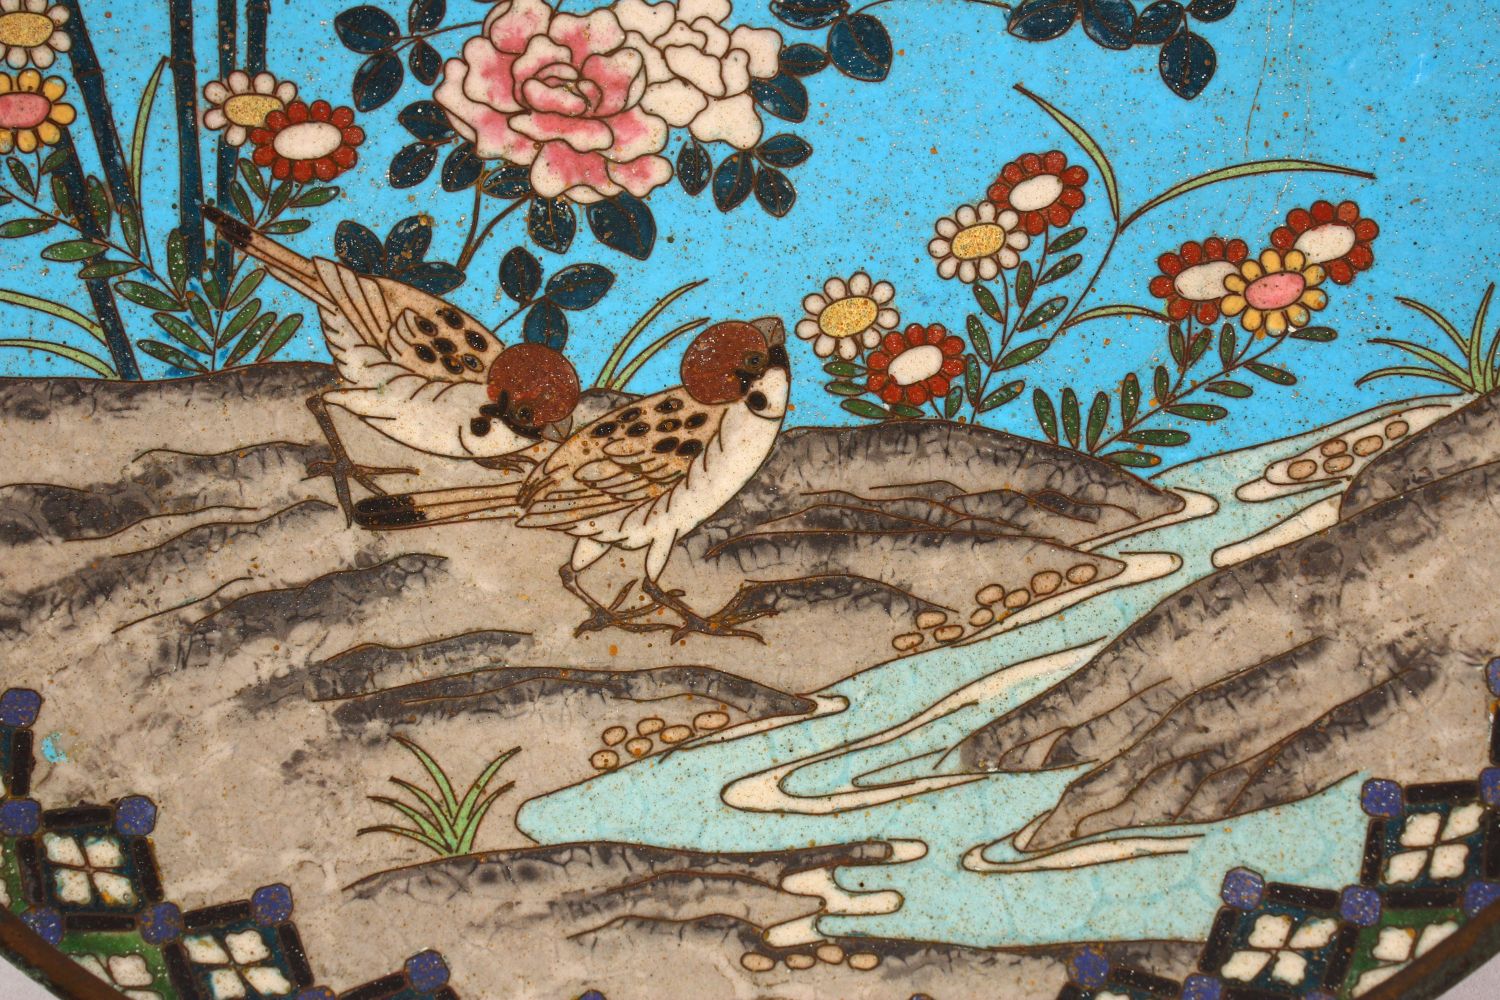 A CLOISONNE CIRCULAR DISH, depicting birds and flowers by a stream, 30cm diameter. - Image 3 of 4